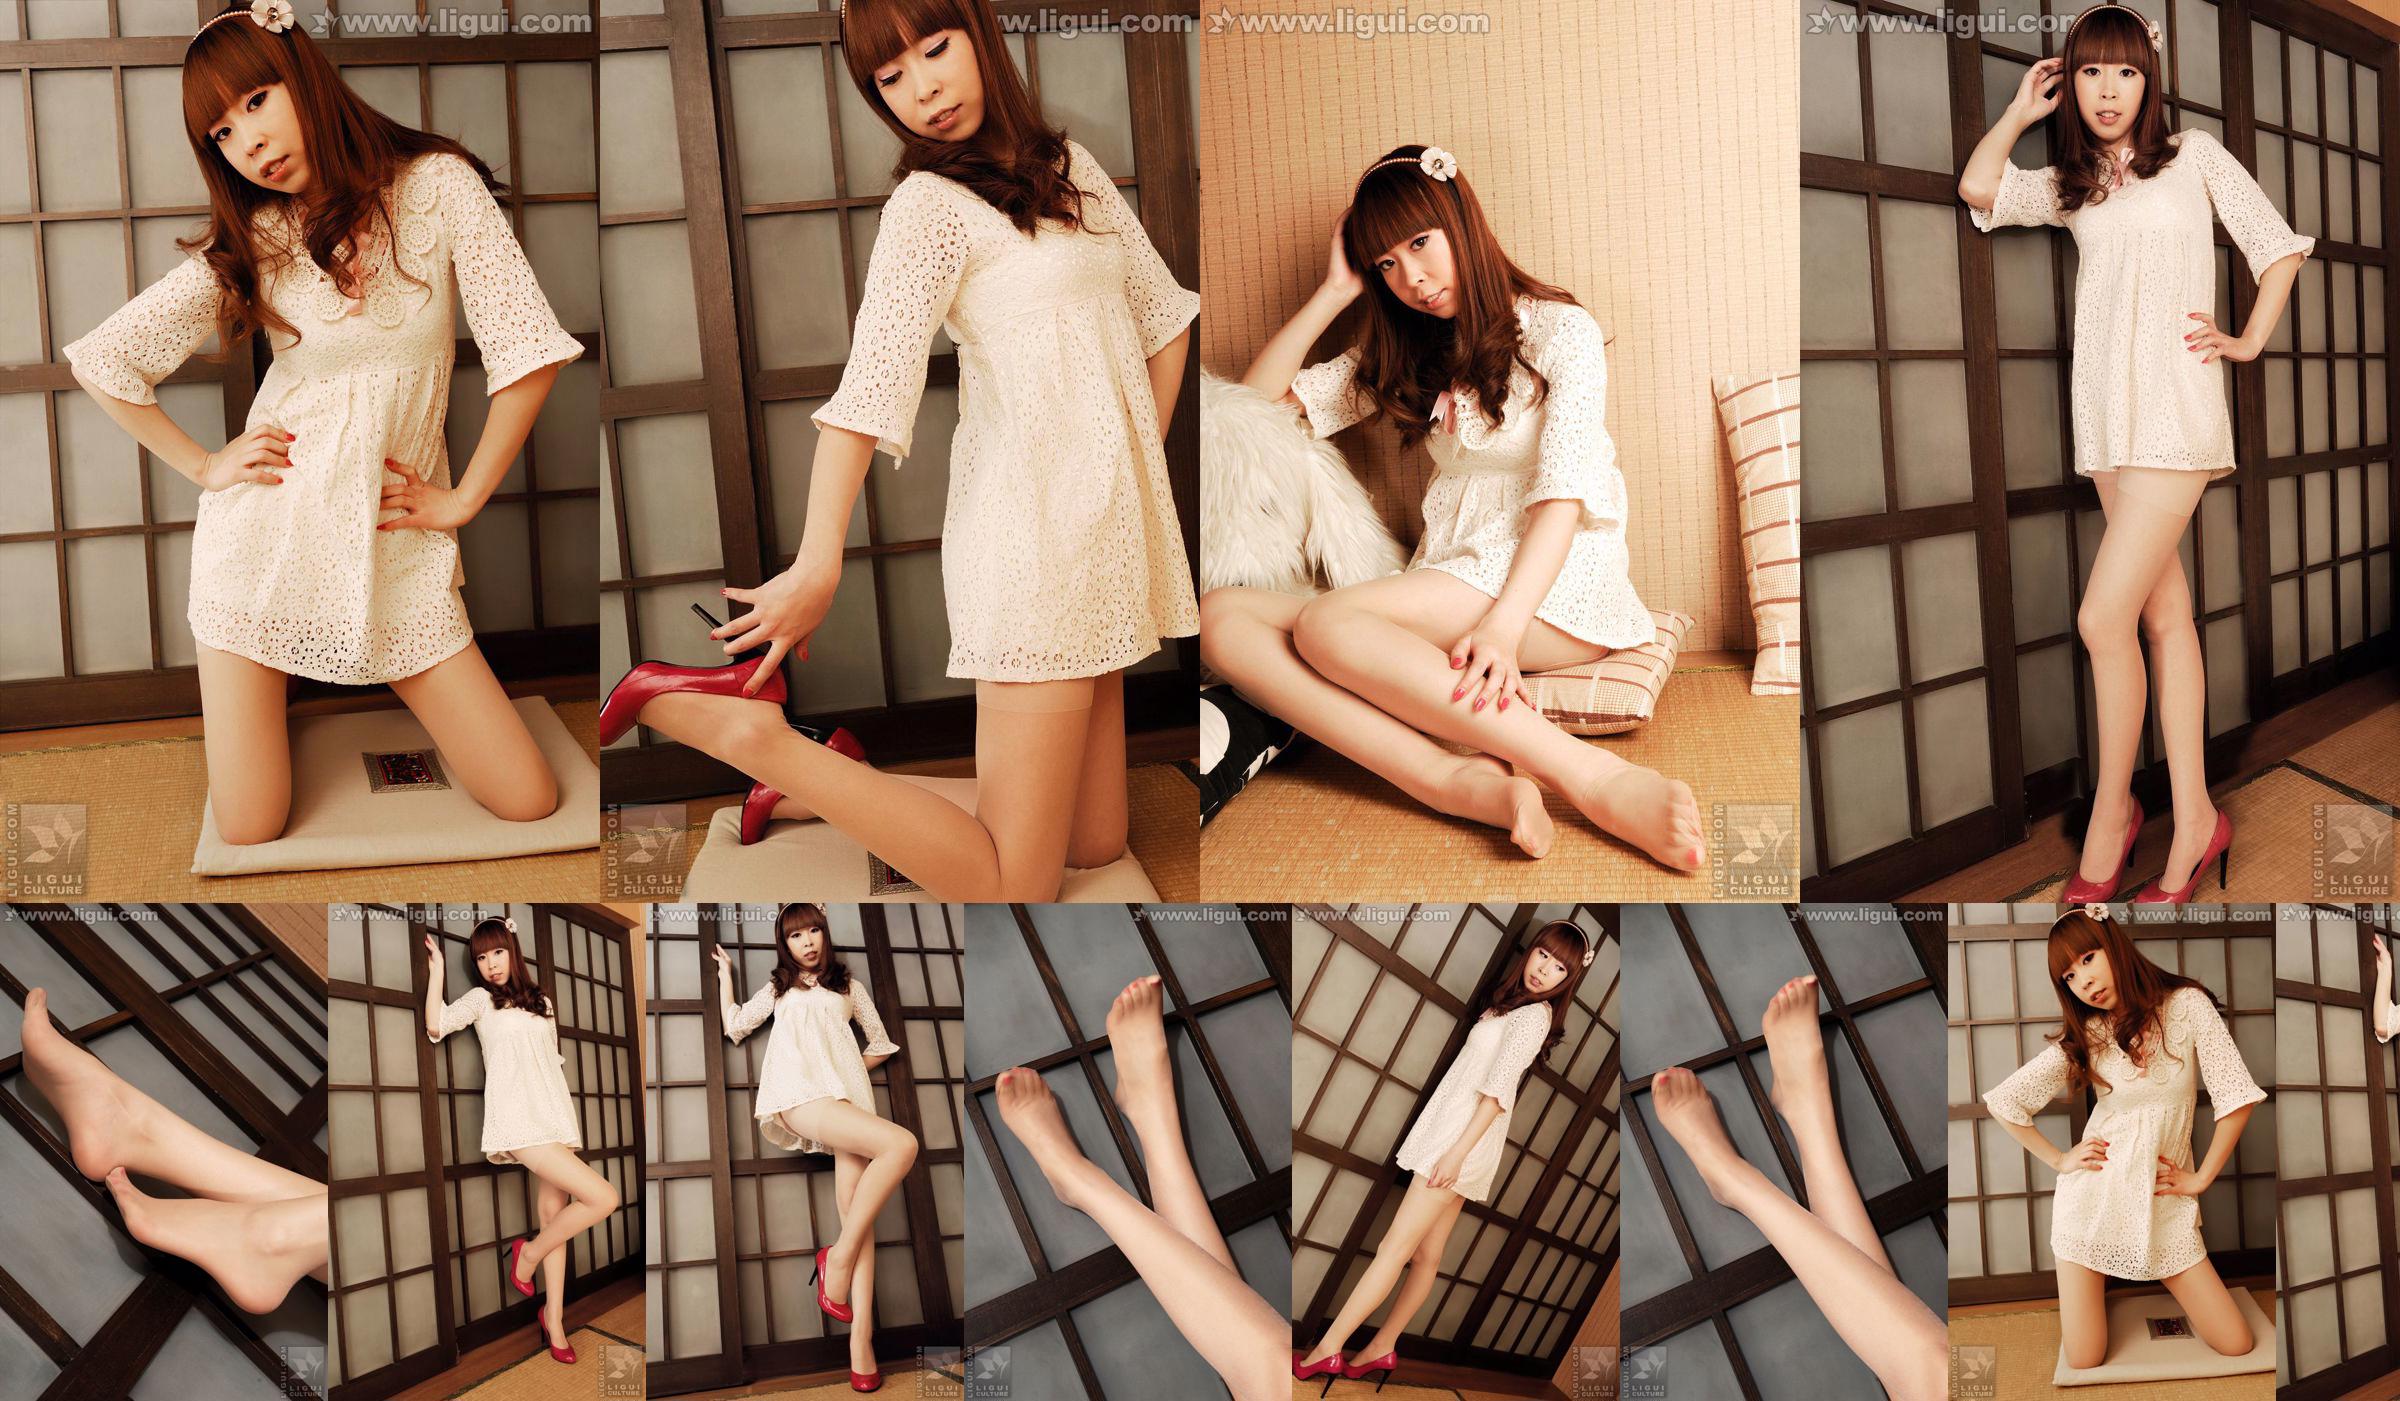 Model Vikcy "The Temptation of Japanese Style" [丽 柜 LiGui] Mooie benen en Jade Foot Photo Picture No.ae8a09 Pagina 1